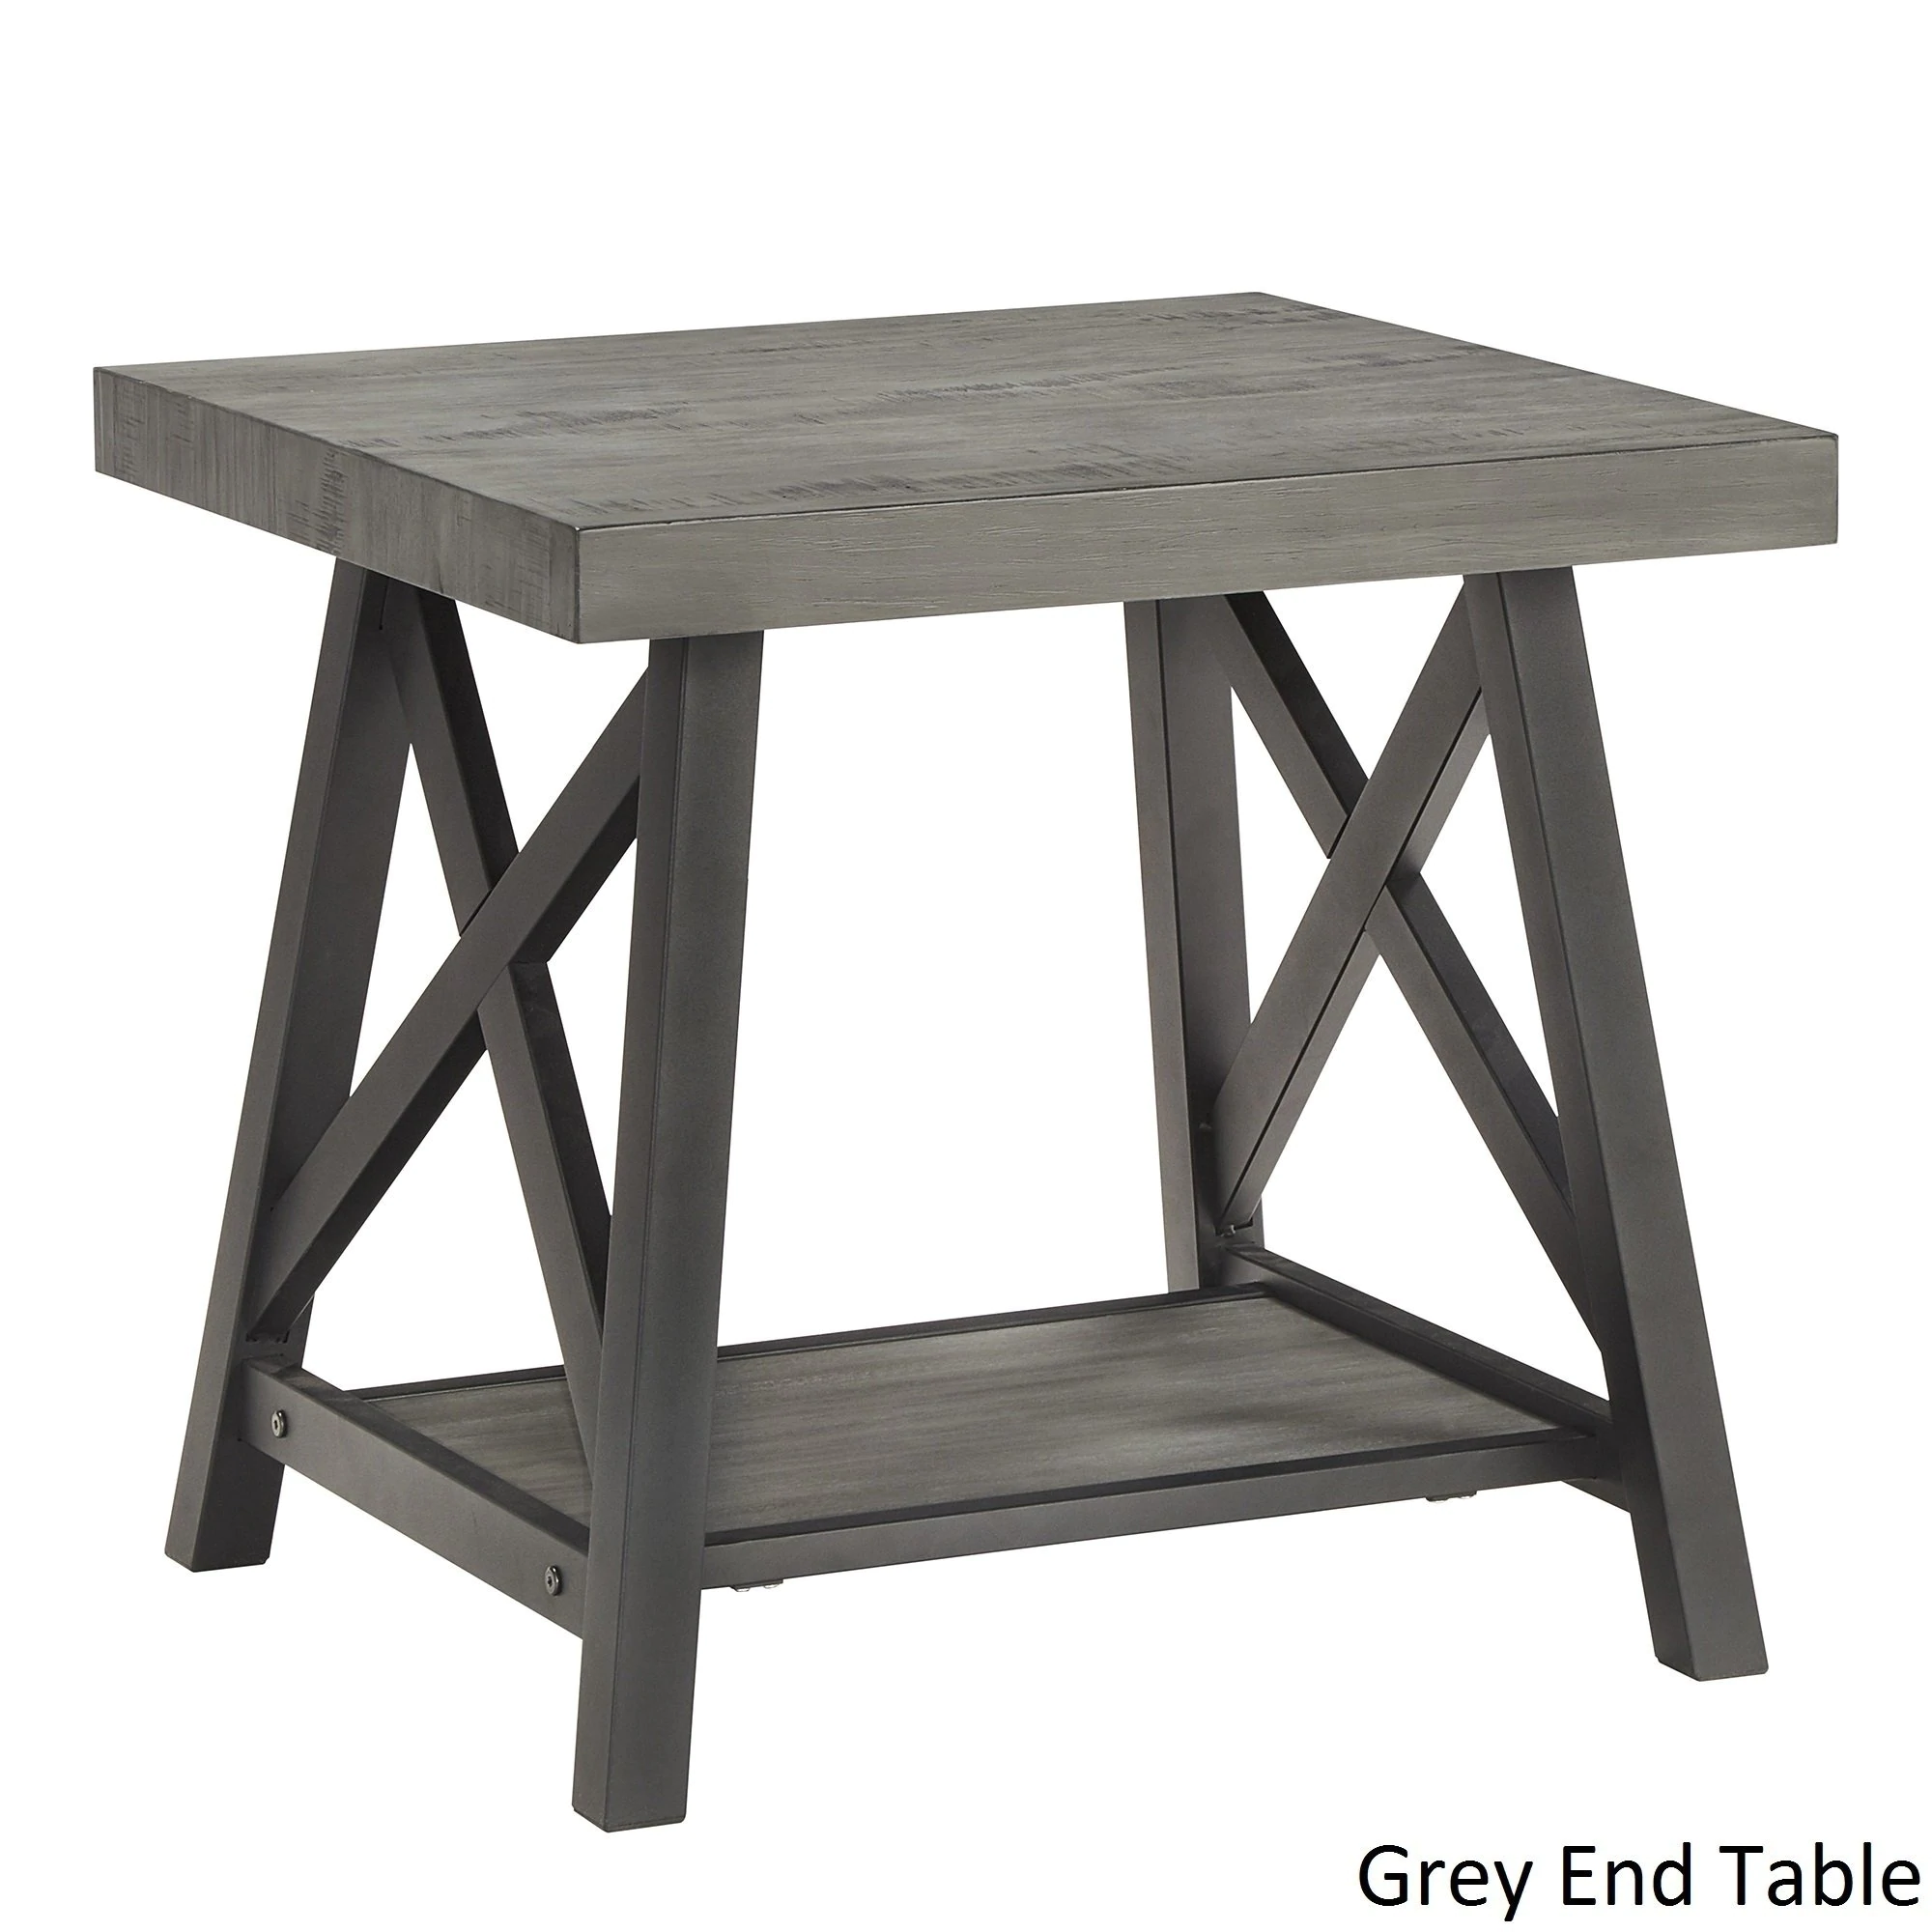 bryson rustic base accent tables inspire classic white table free shipping today farmhouse plans circle chair target high top height small narrow coffee west elm emmerson patio